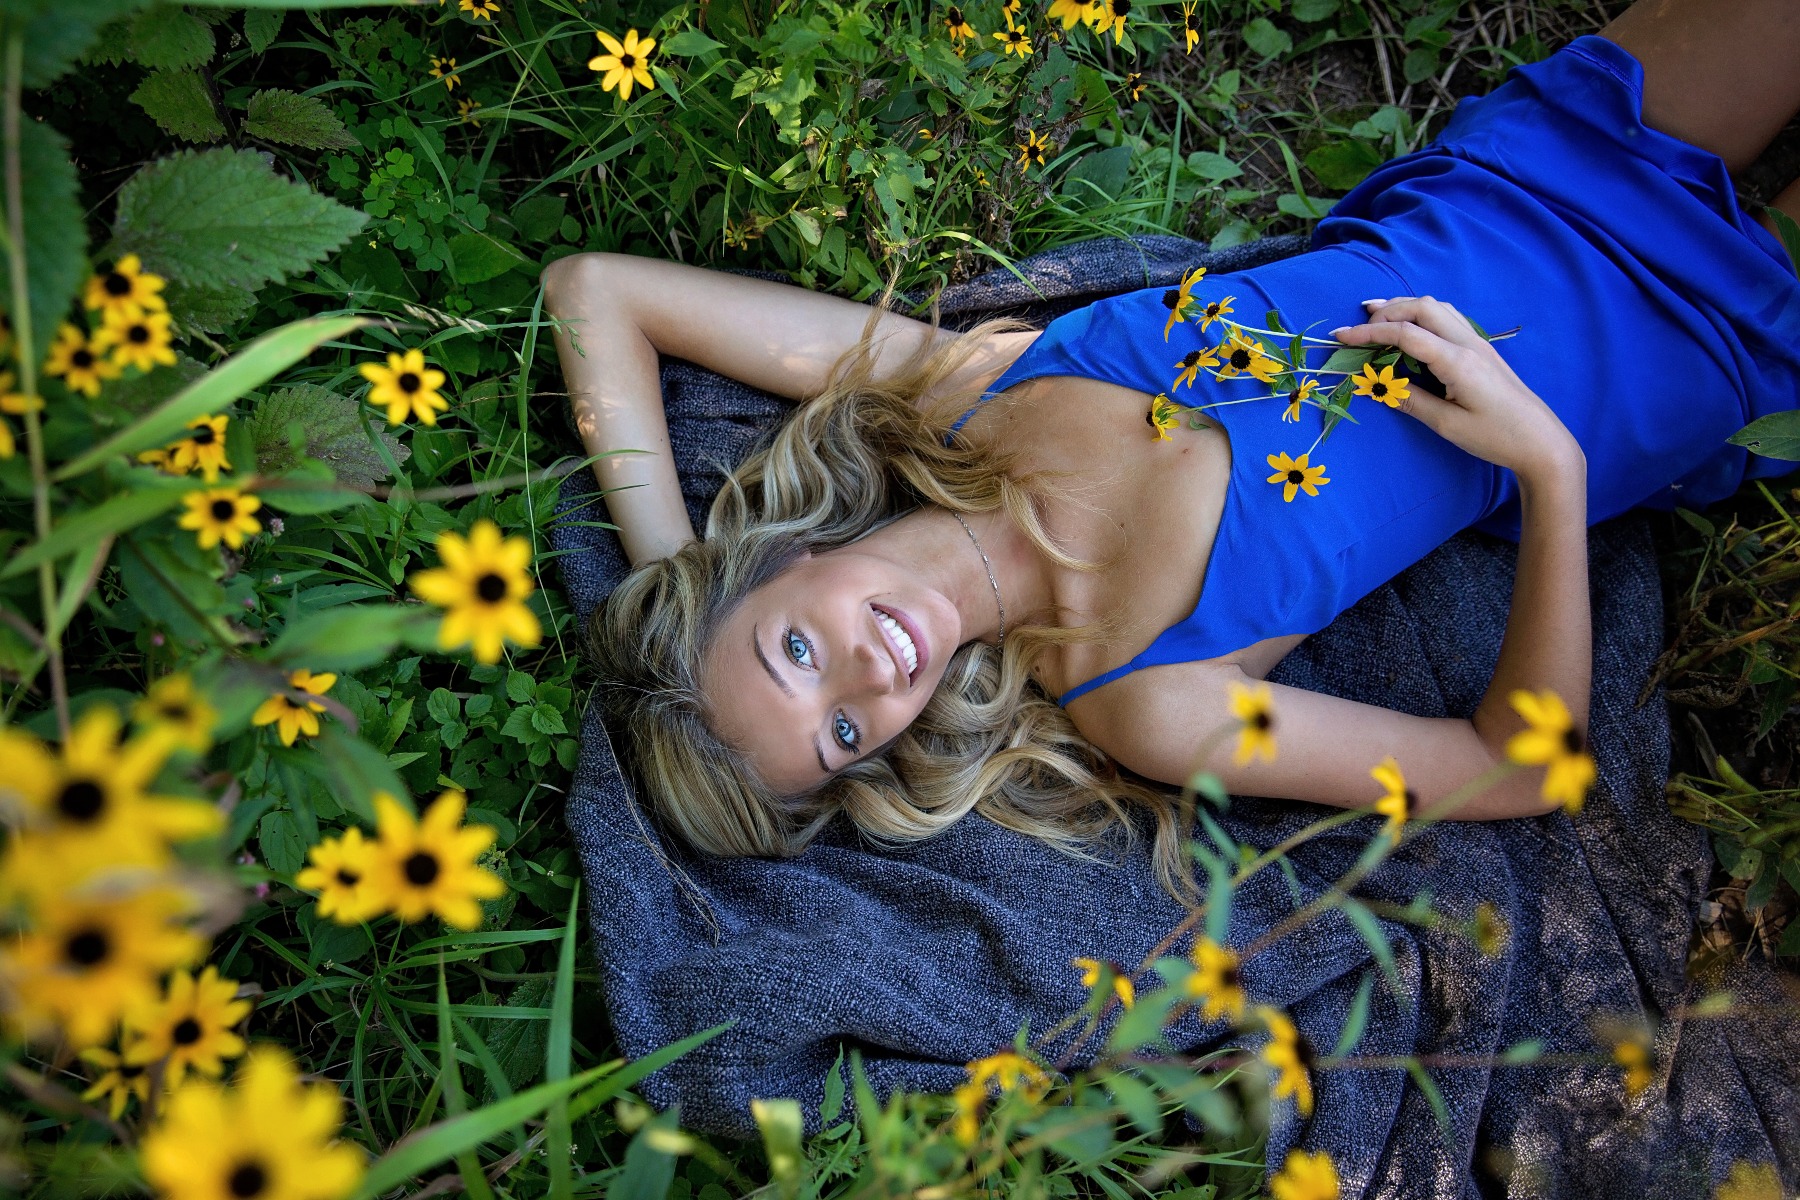 hs senior girl lays on a blanket amongst the yellow flowers